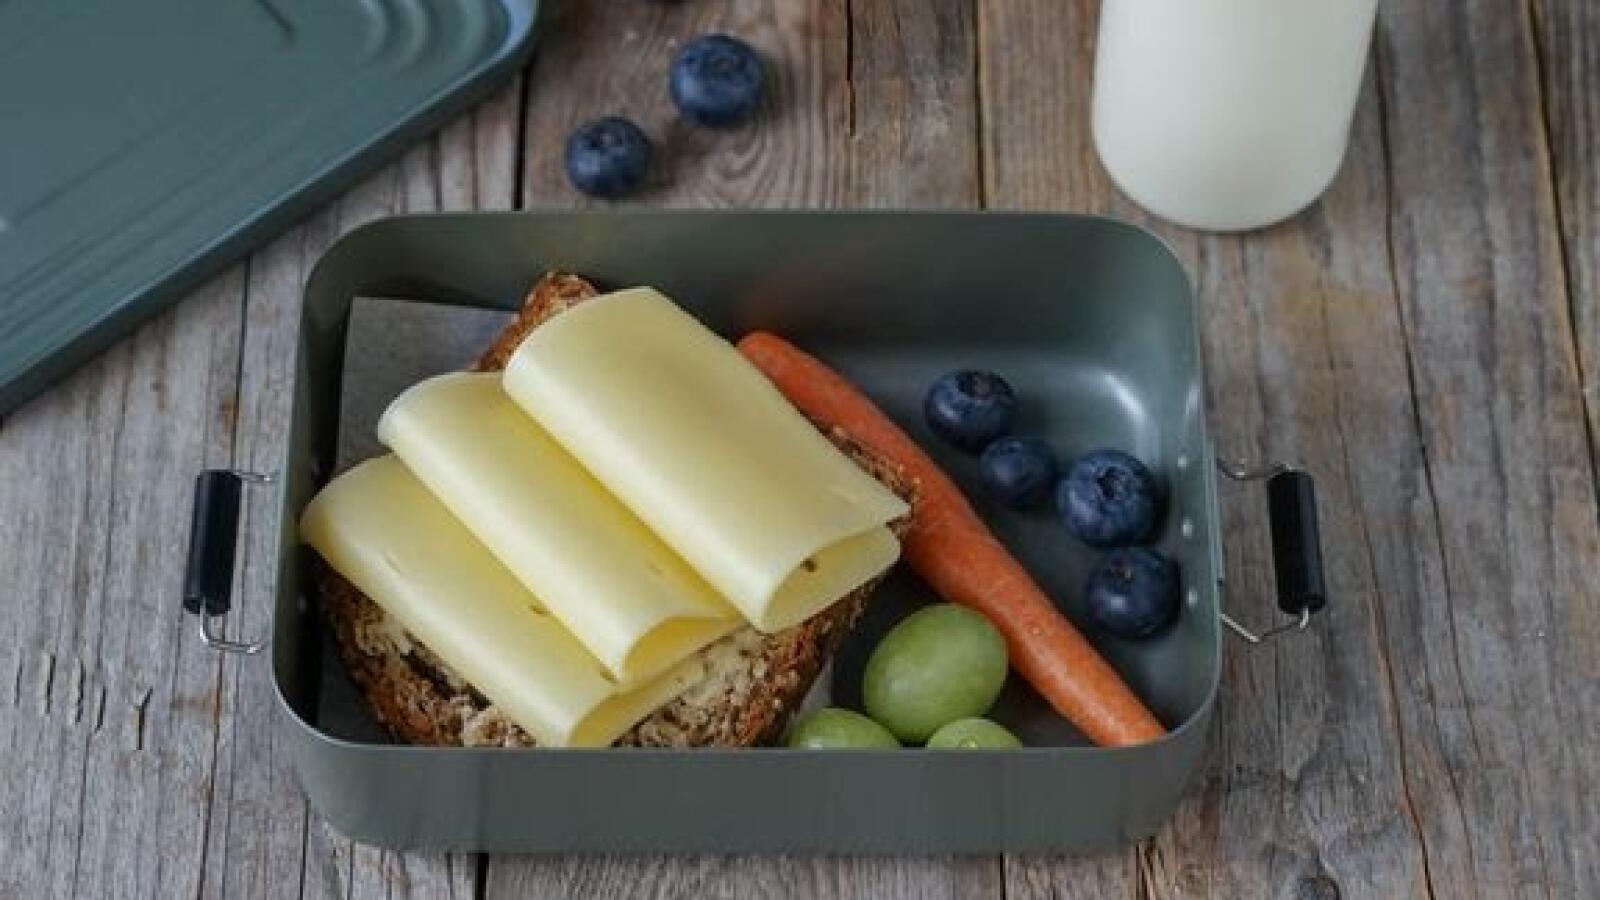 8/10: More than 8 out of 10 students in high school take a packed lunch at least three days a week, and a typical packed lunch consists of whole grain bread with yellow cheese.  Photo: Melk.no